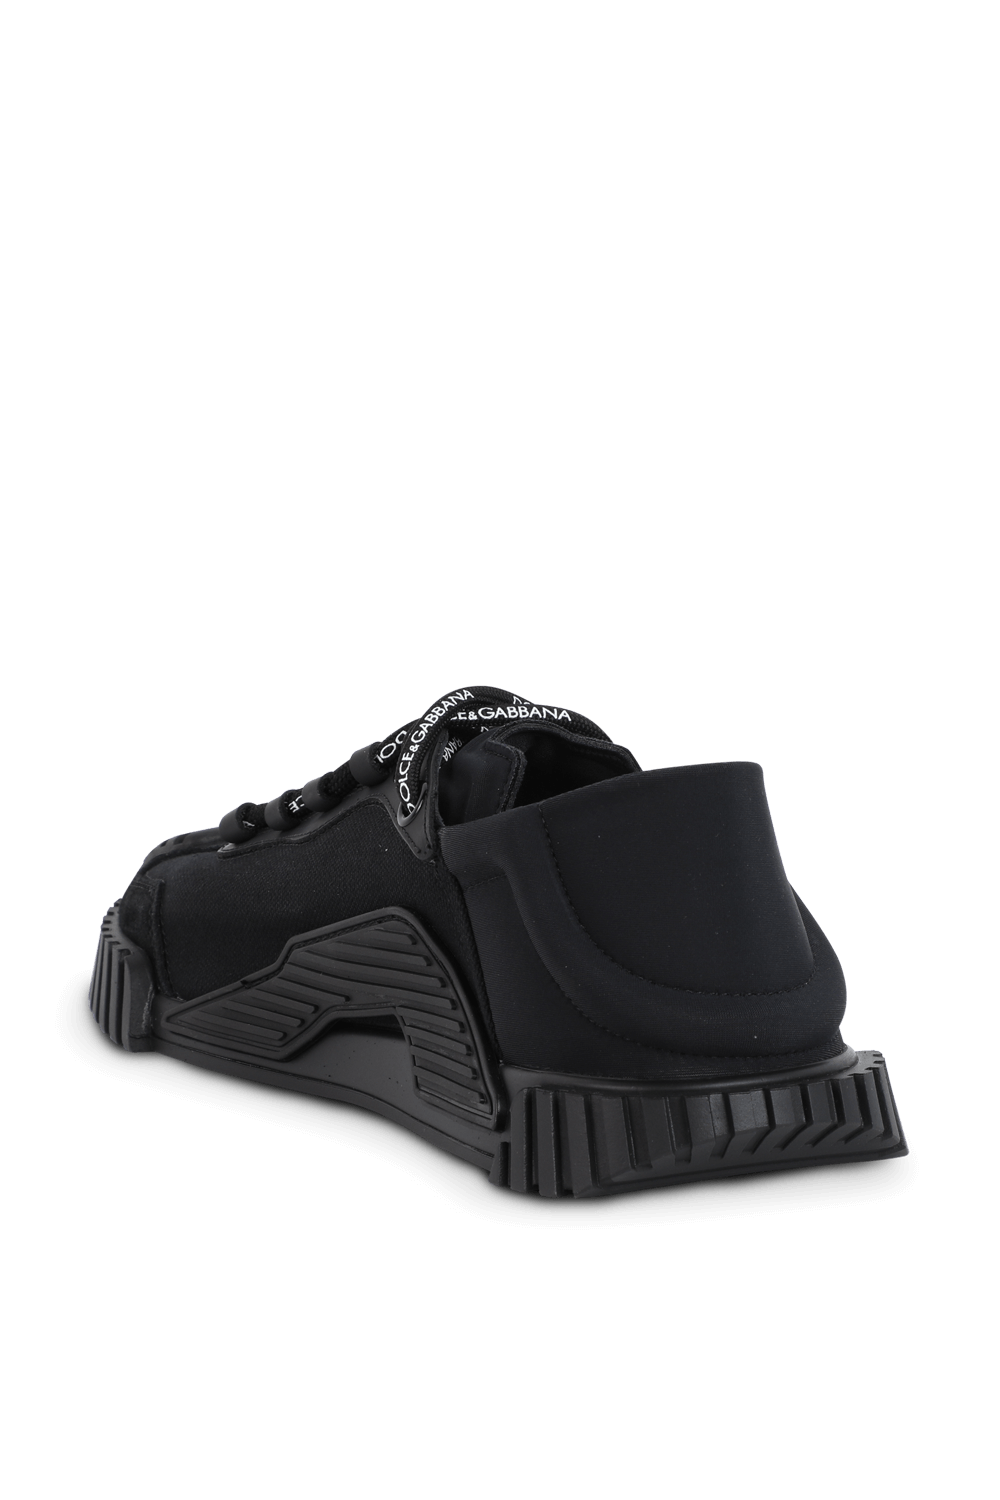 Canvas NS1 Sip-On Sneakers in Black DOLCE & GABBANA